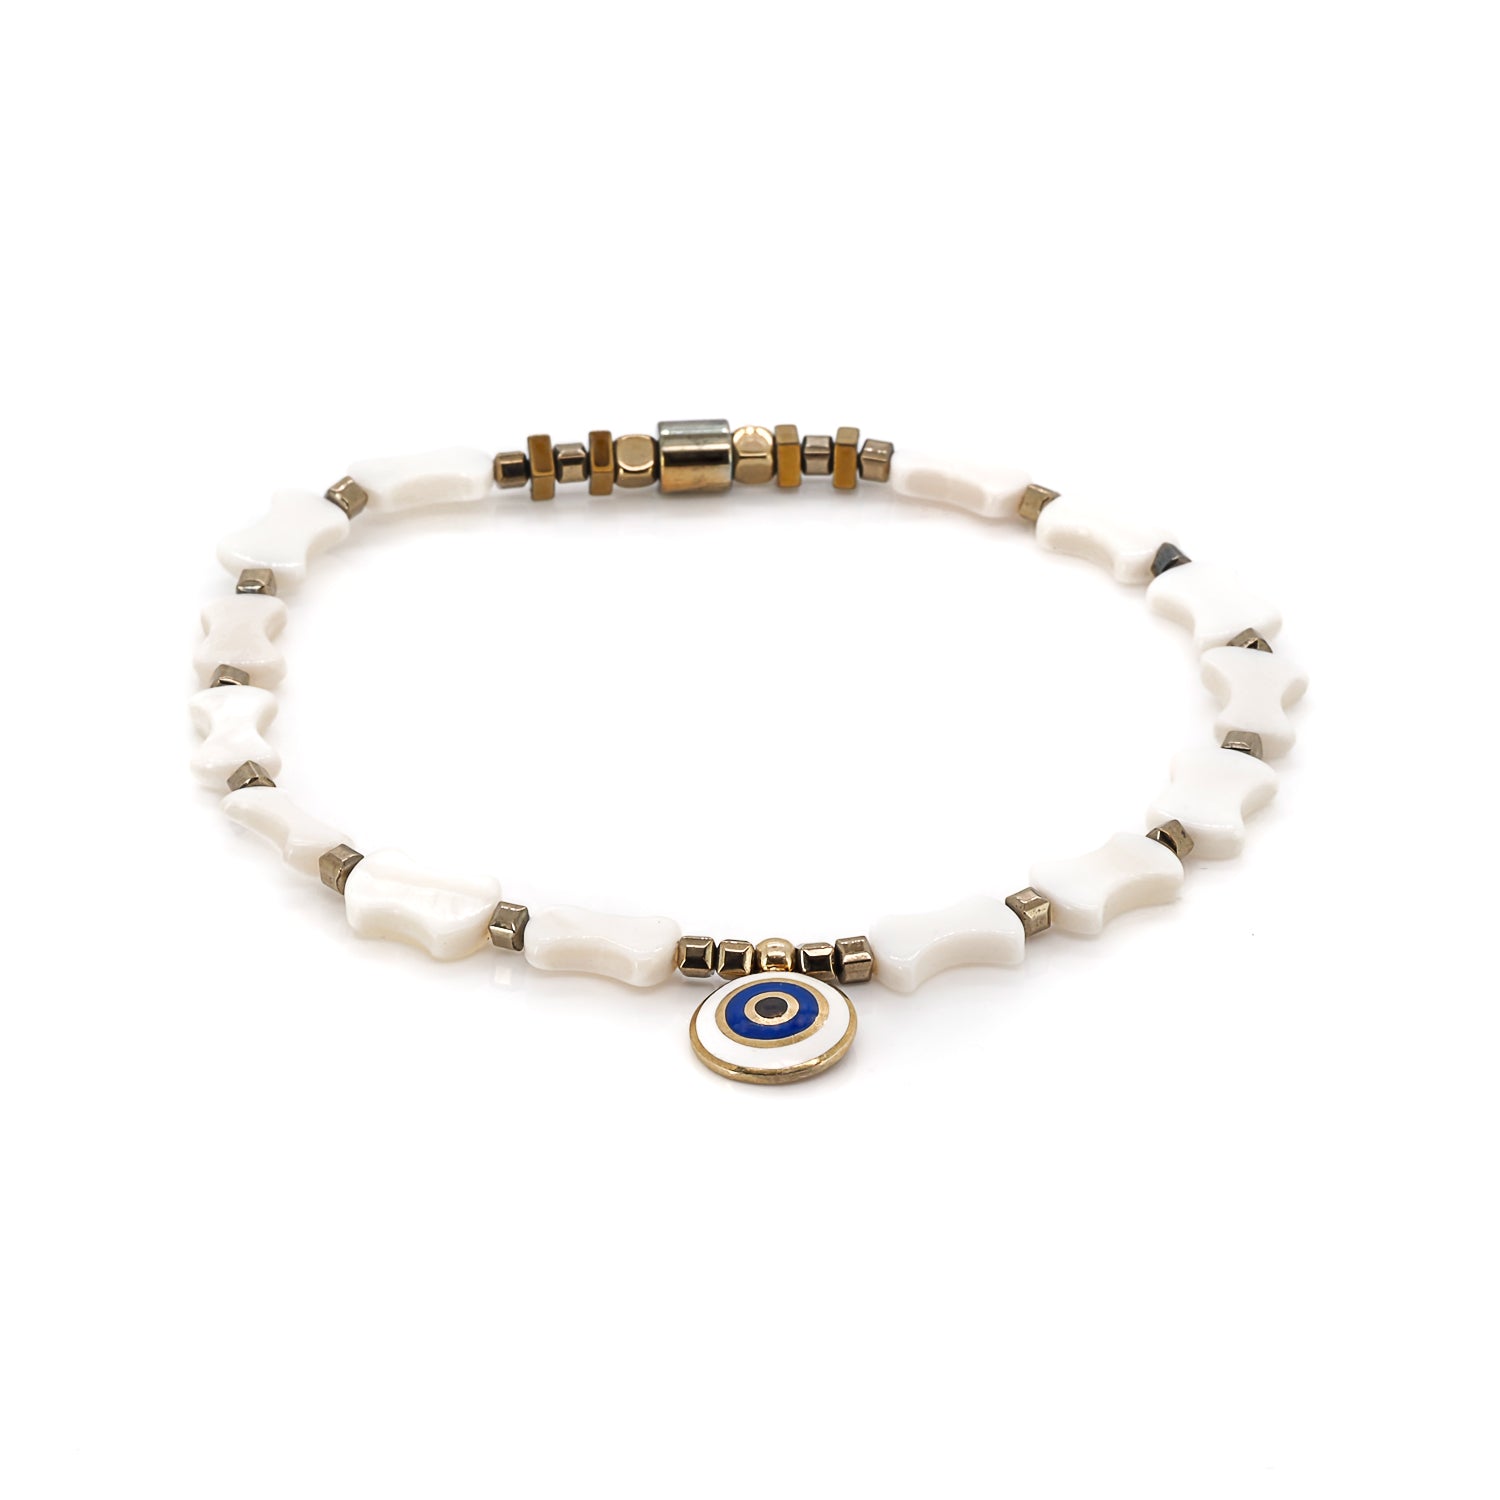 Pearl Evil Eye Anklet - A harmonious blend of pearls and symbolism.